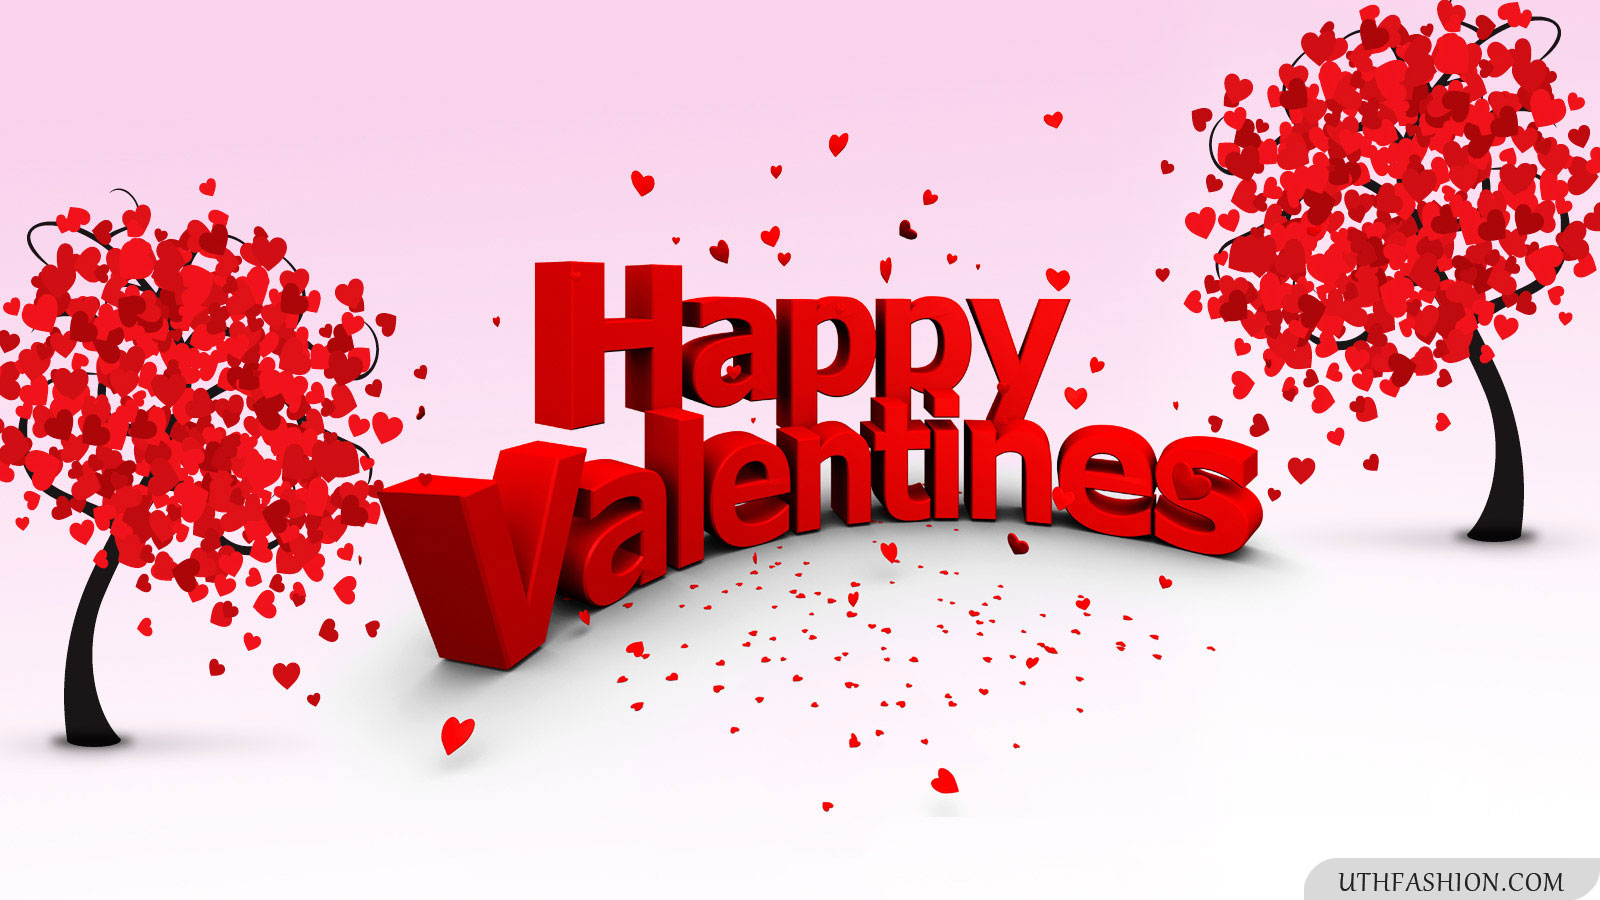 Image Of Valentines Day Happy Valentines Day 2016 Quotes Wishes